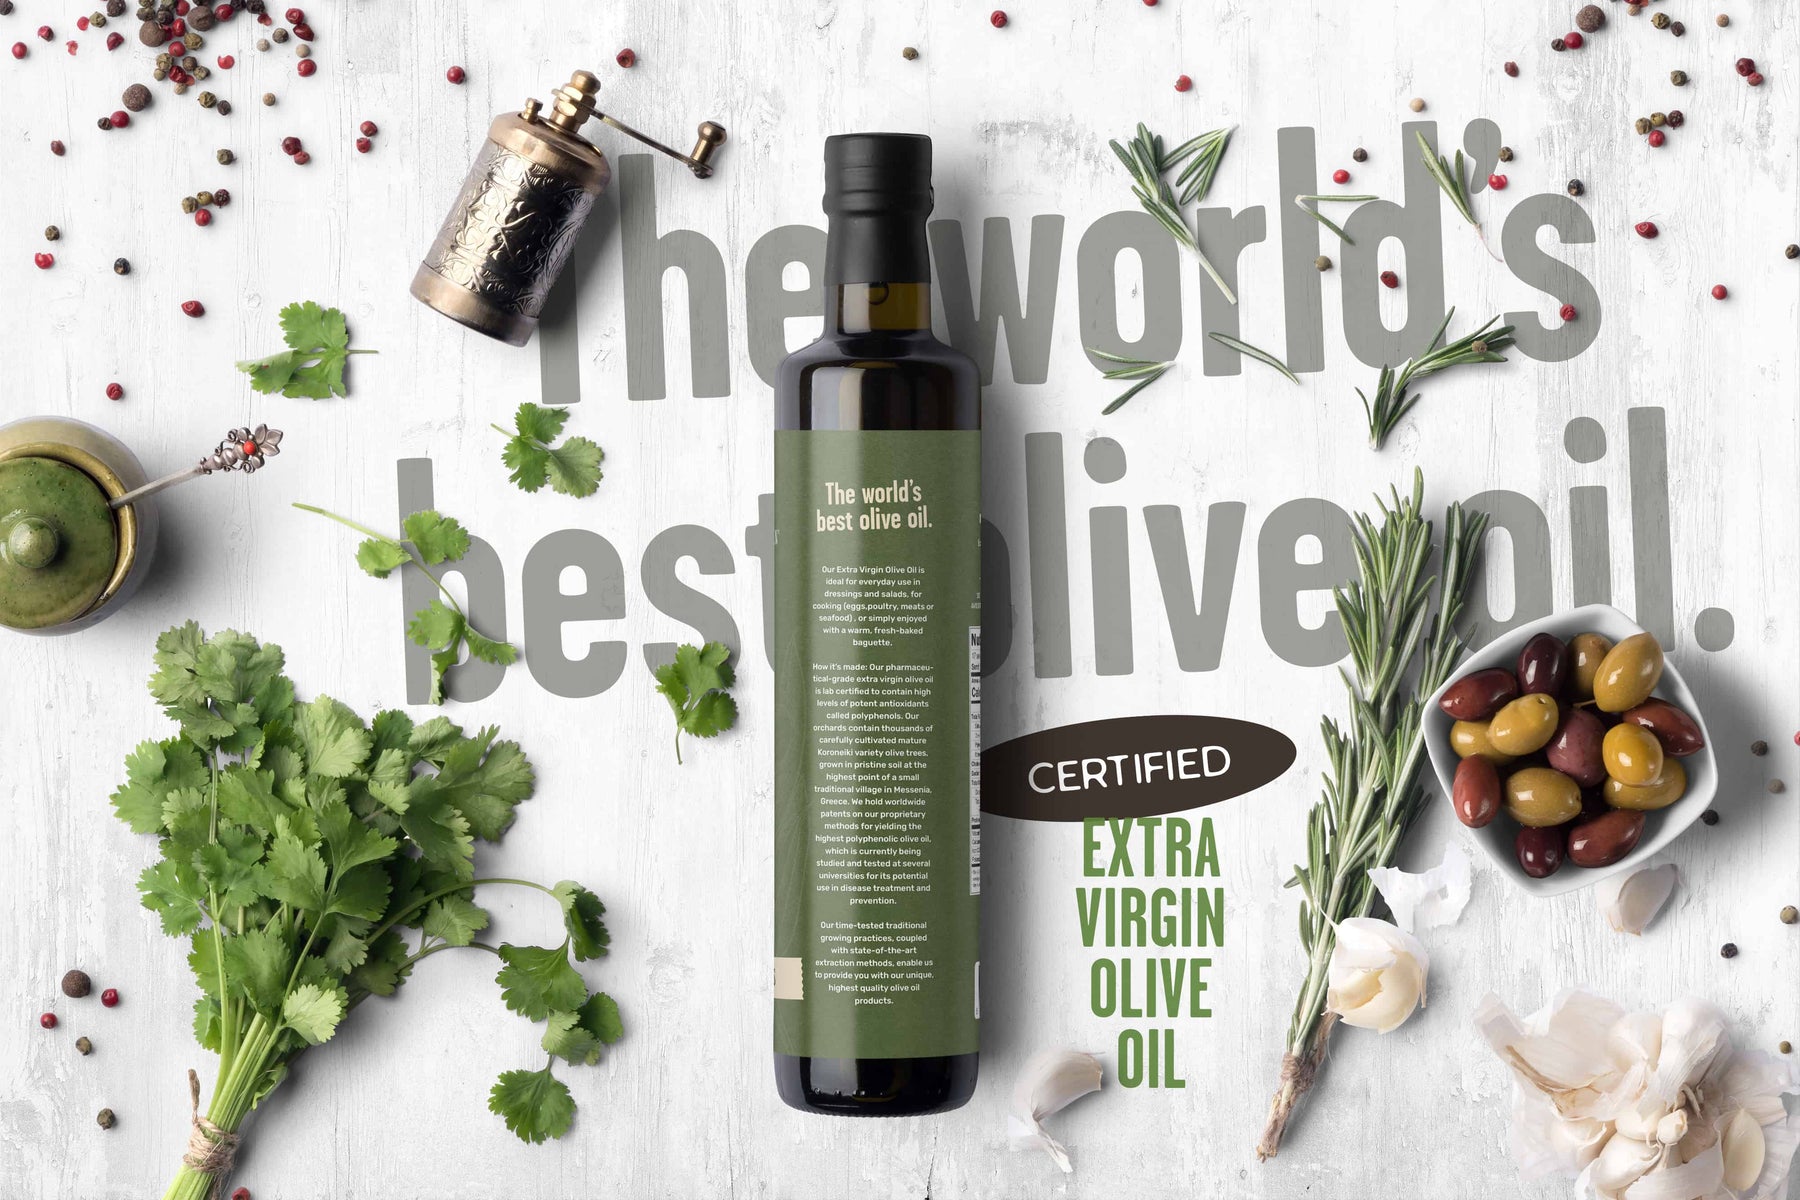 Certified Extra Virgin Olive Oil